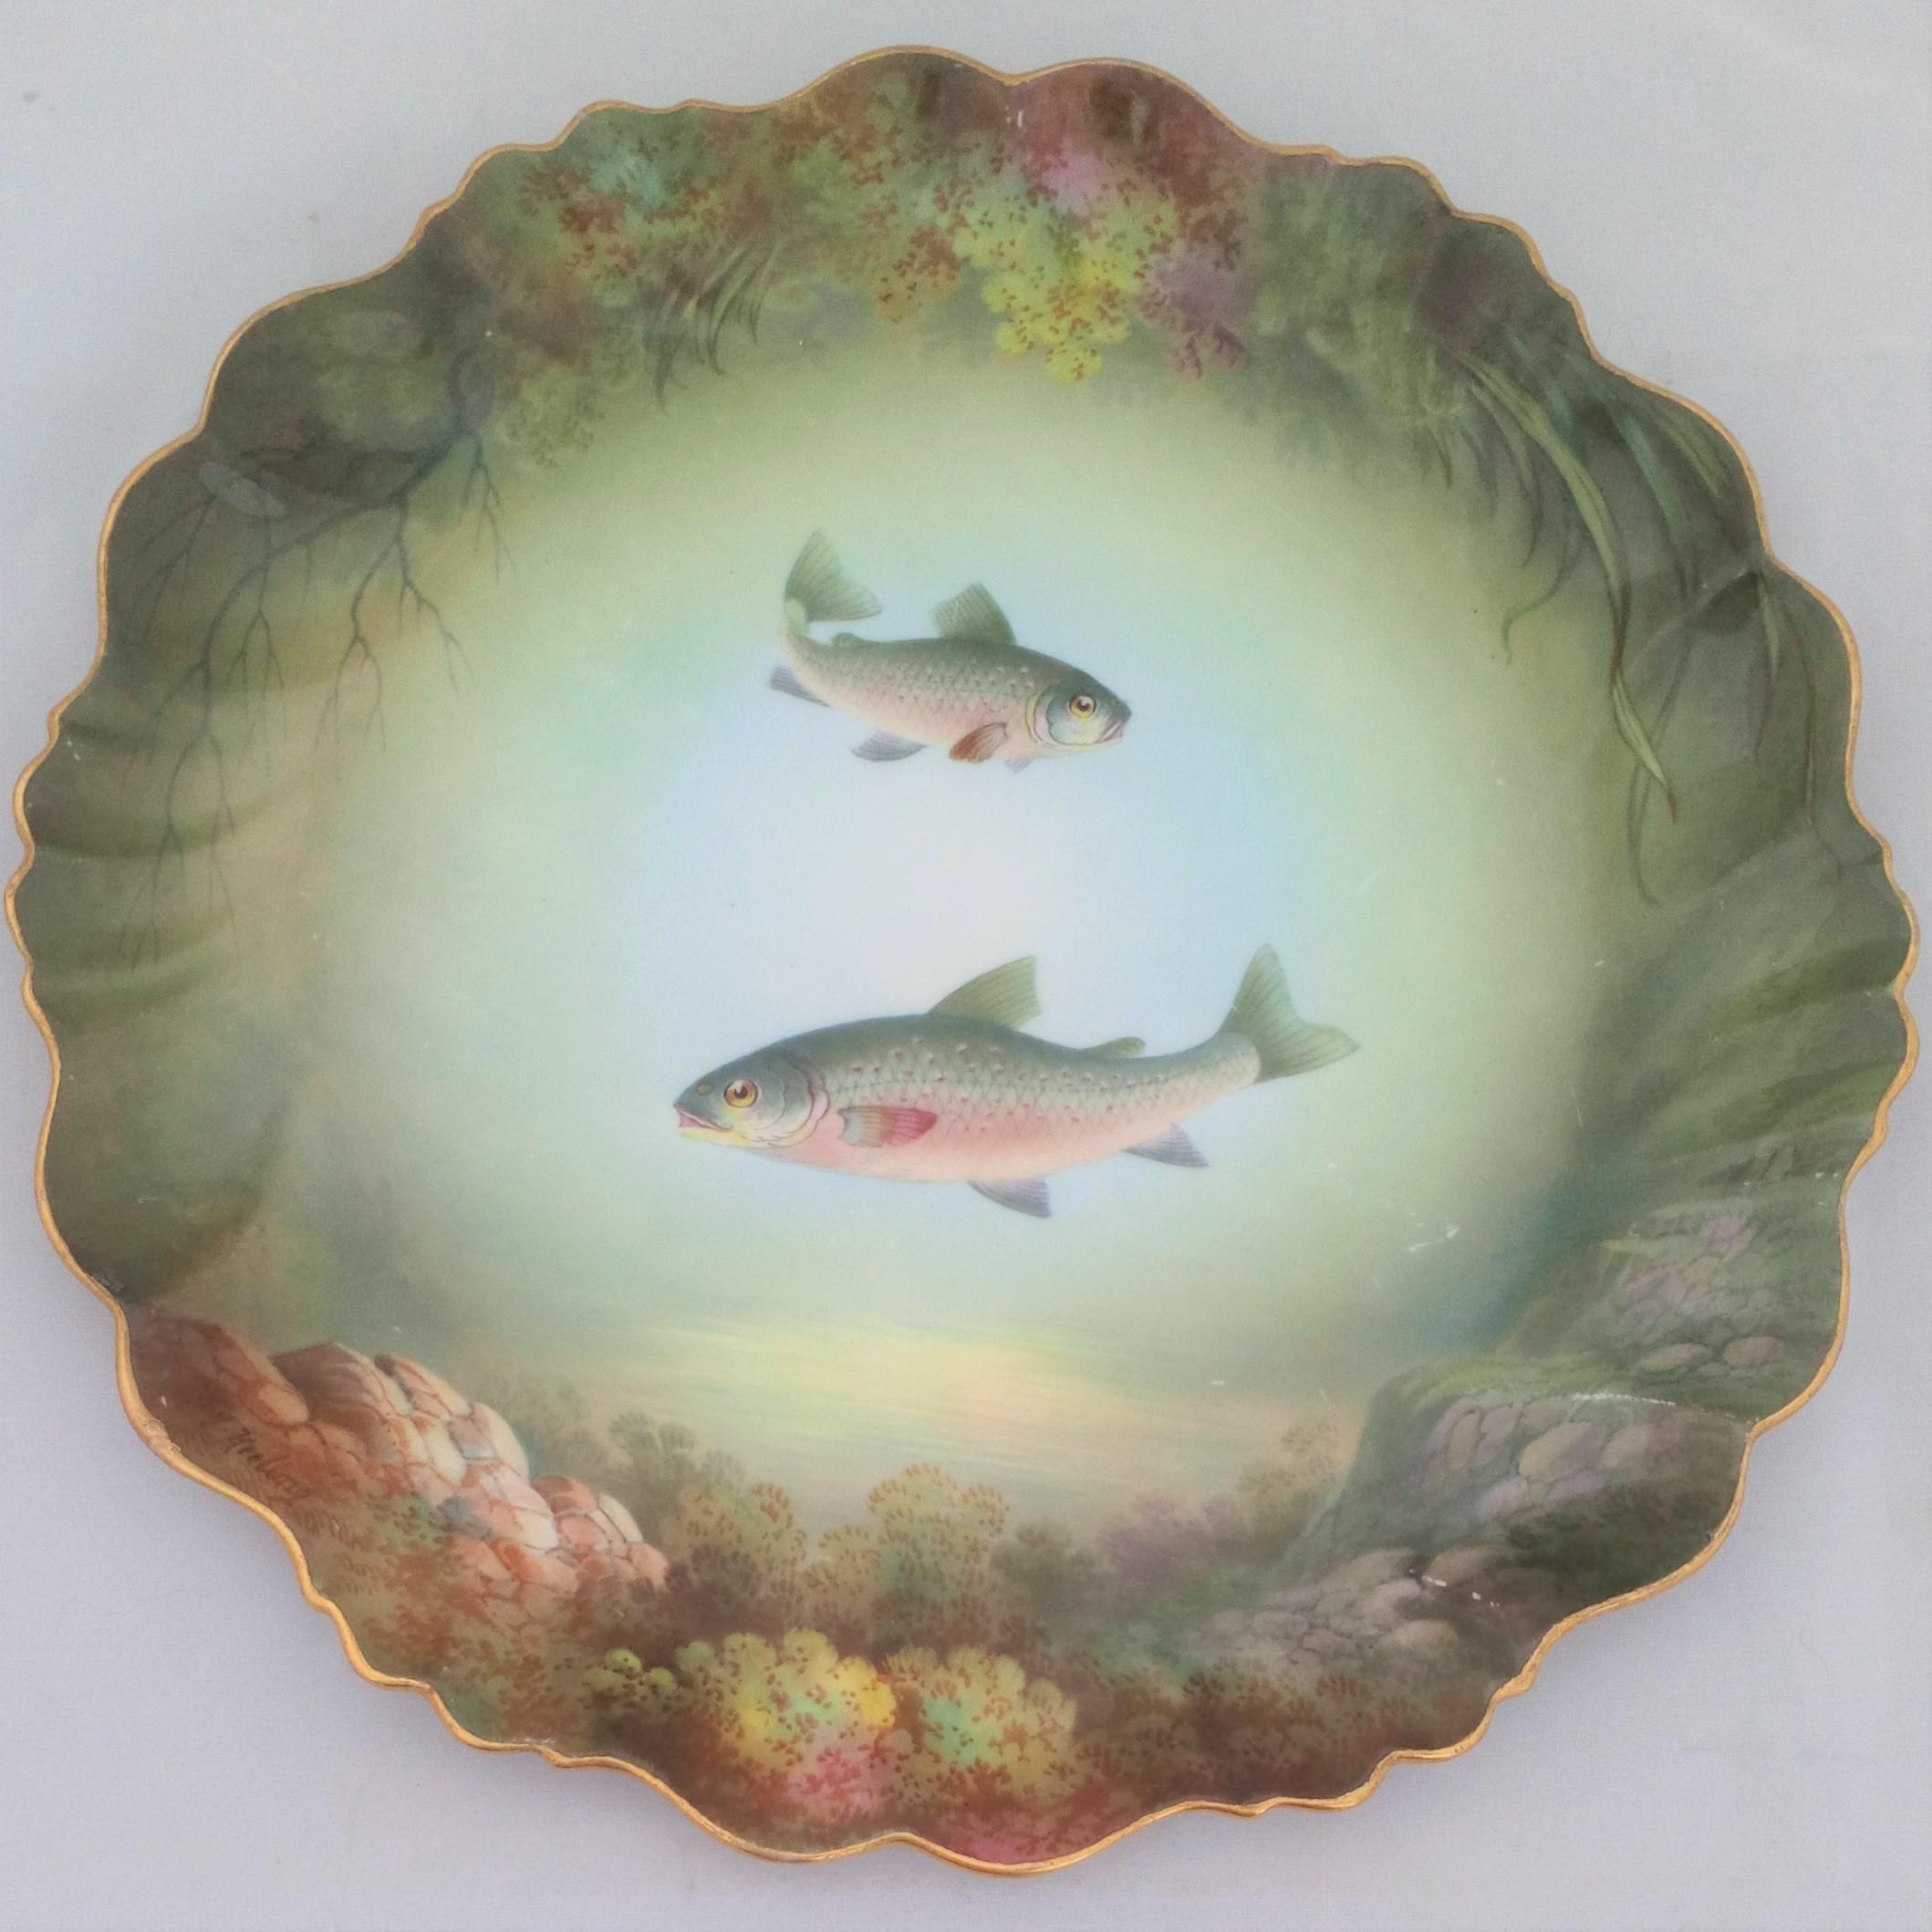 Antique Hand Painted Paragon China Plate Windermere Char Fish R.J Keeling c 1905